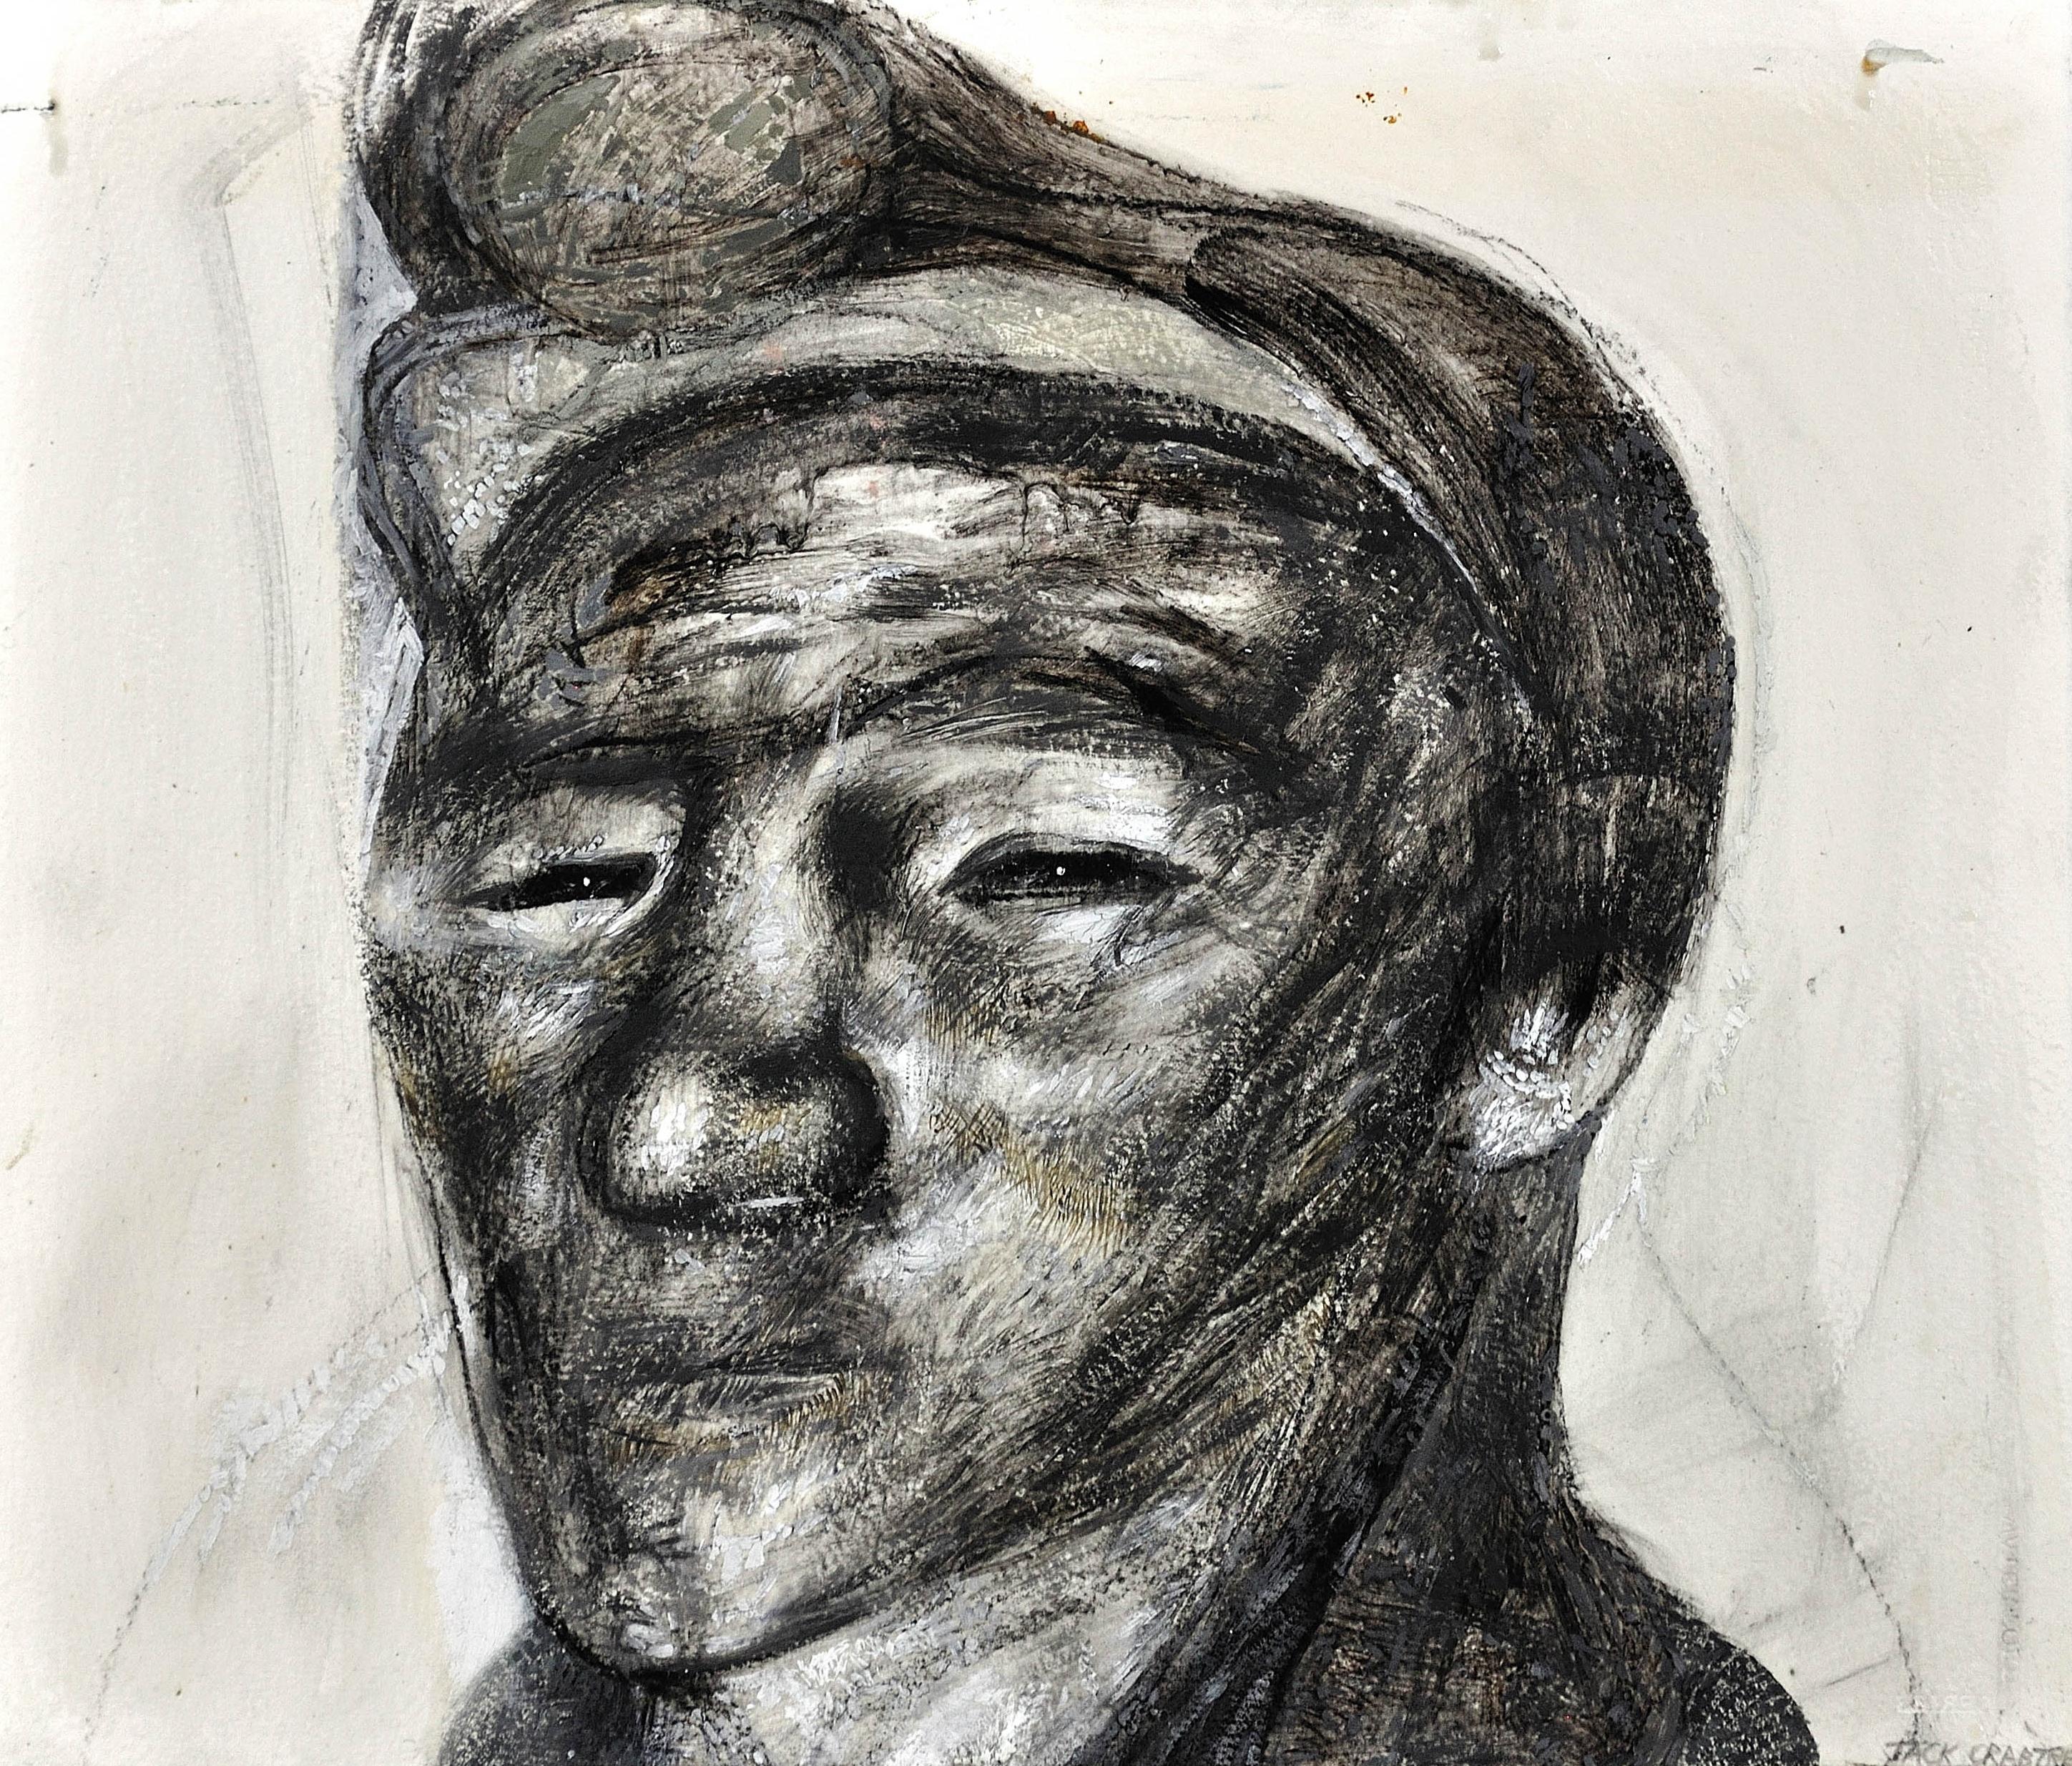 Jack Crabtree. 
English ( b.1938 ).
Welsh Miner
Mixed Media. Signed.
Image size 14.8 inches x 17.5 inches ( 37.5cm x 44.5cm ).
Frame size 23.4 inches x 26.2 inches ( 59.5cm x 66.5cm ).

Available for sale; this original mixed media artwork is by